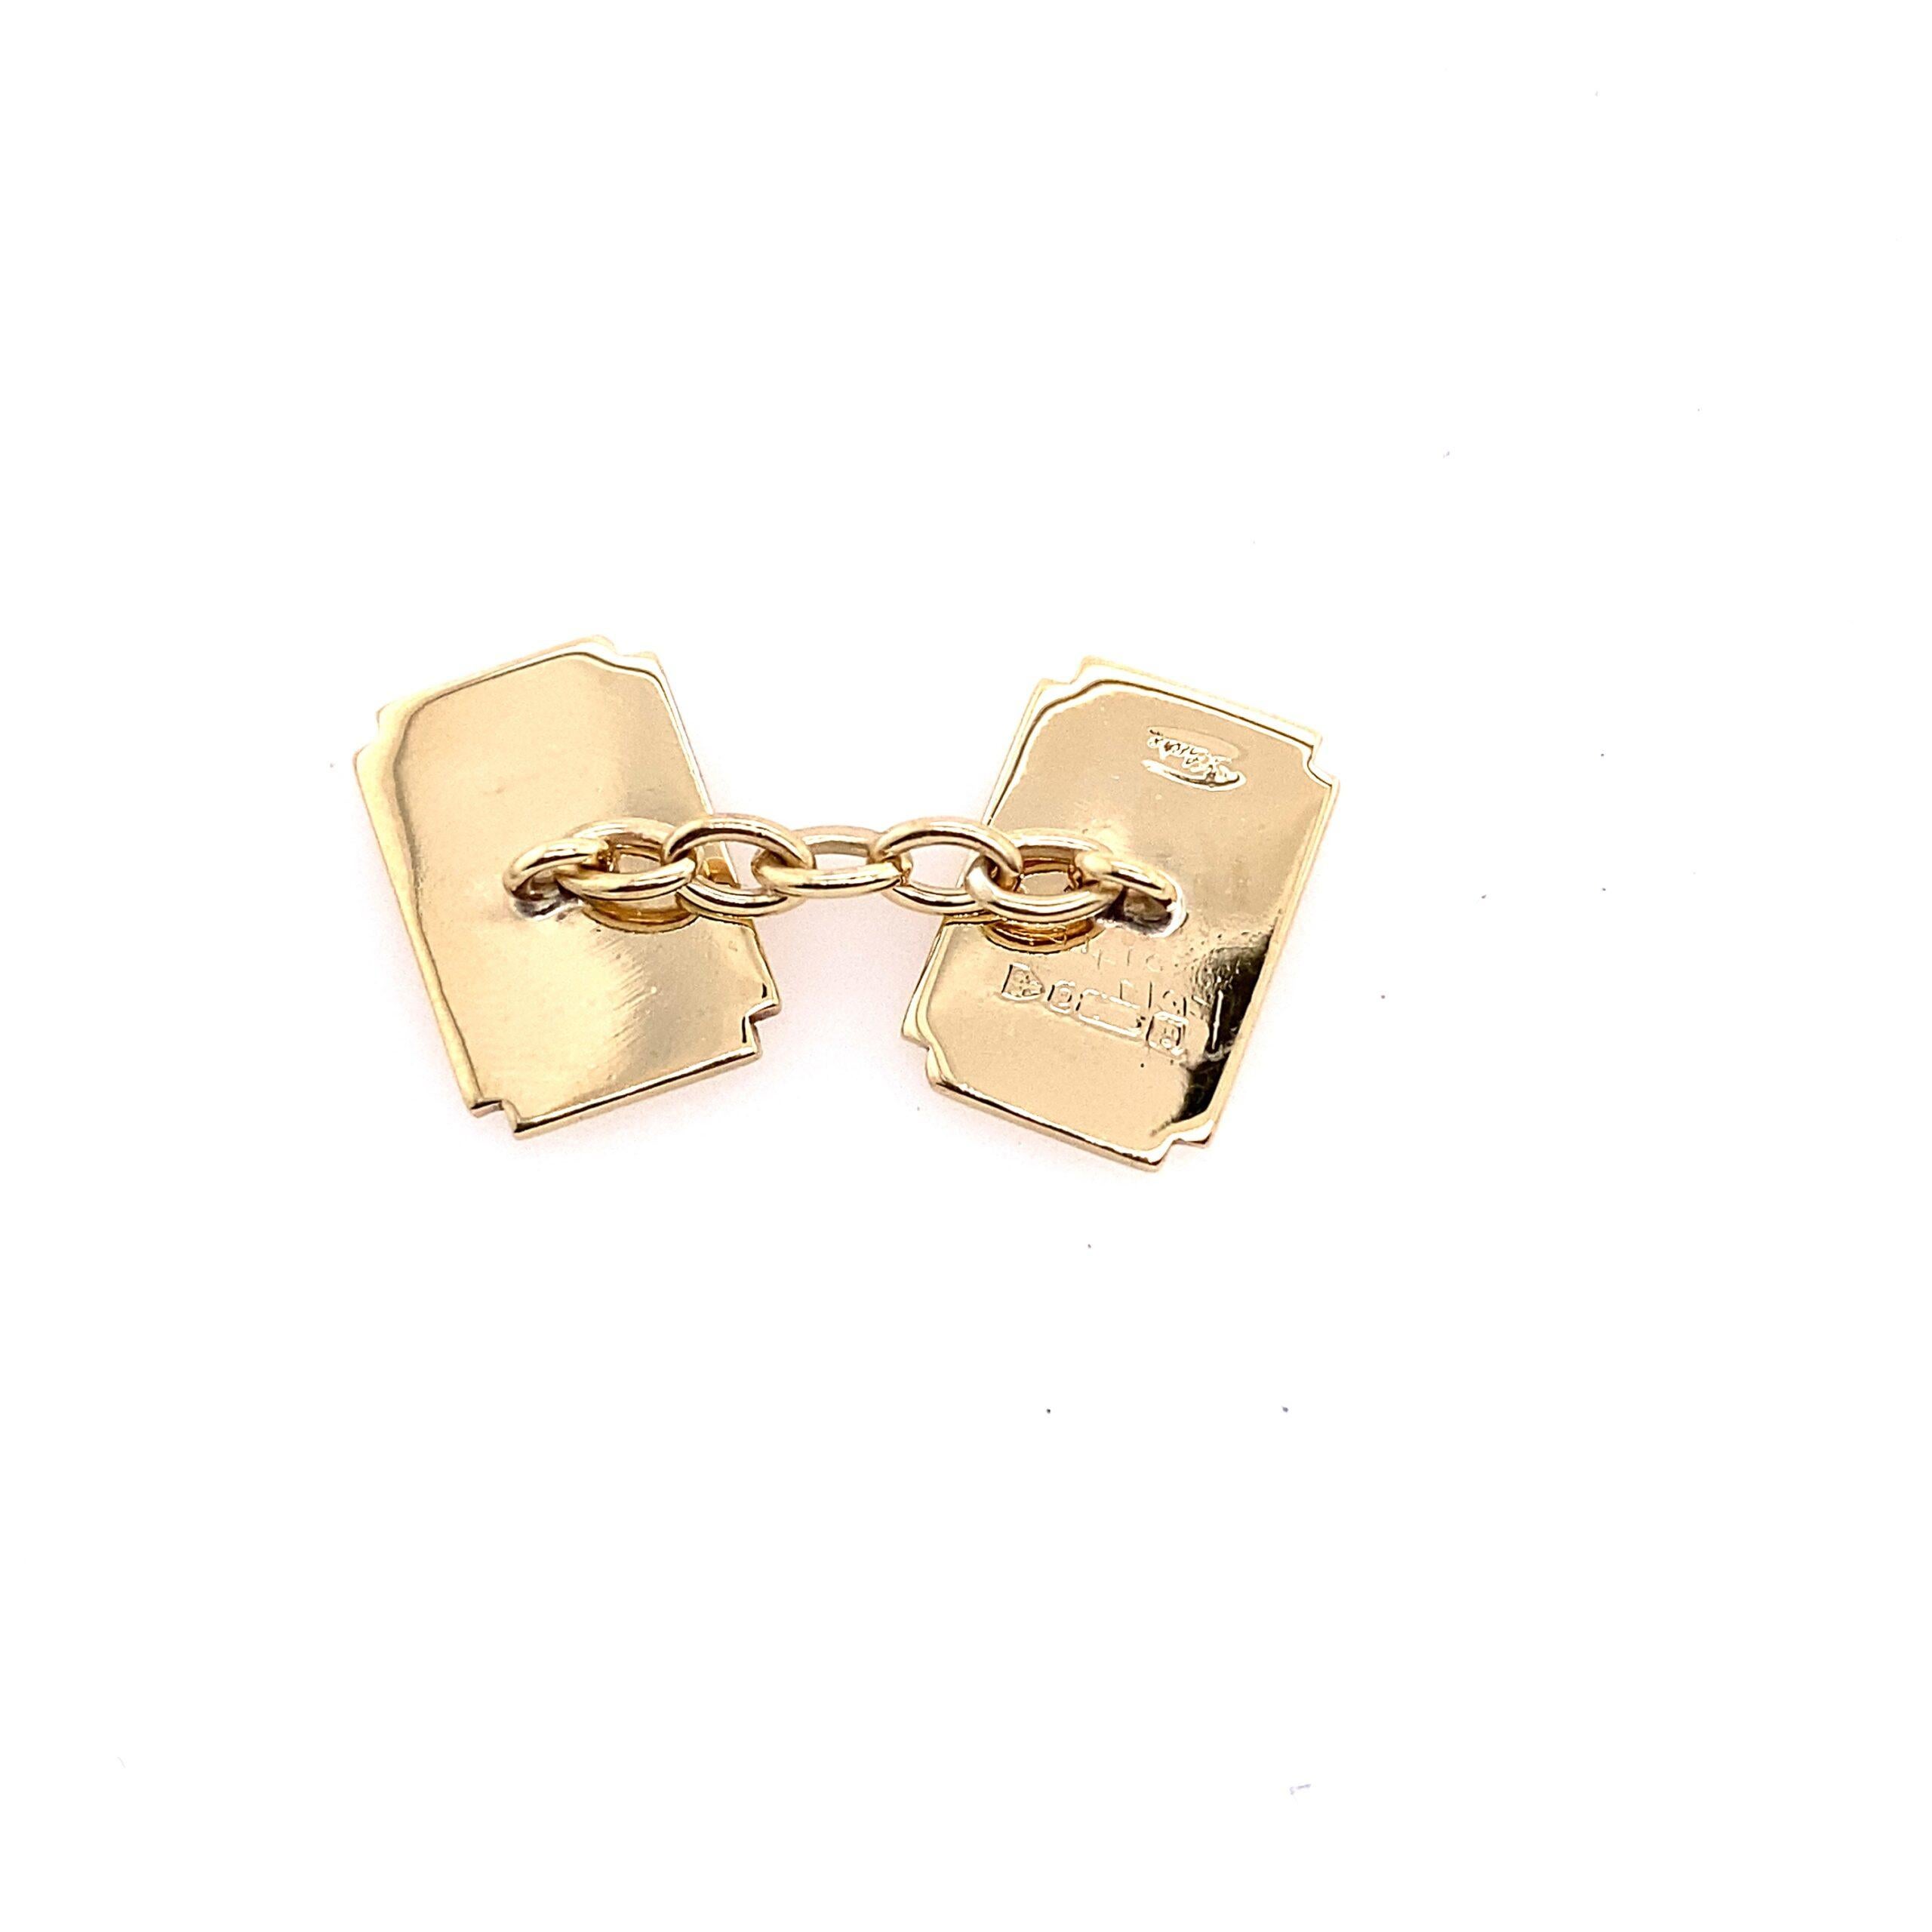 Vintage Double Sided Fully Engine Turned Cufflinks, With Chain In Between In 9ct Gold
Additional Information: 
Total Weight: 7.4g
Item Dimension: 15mm x 10mm
SMS5891